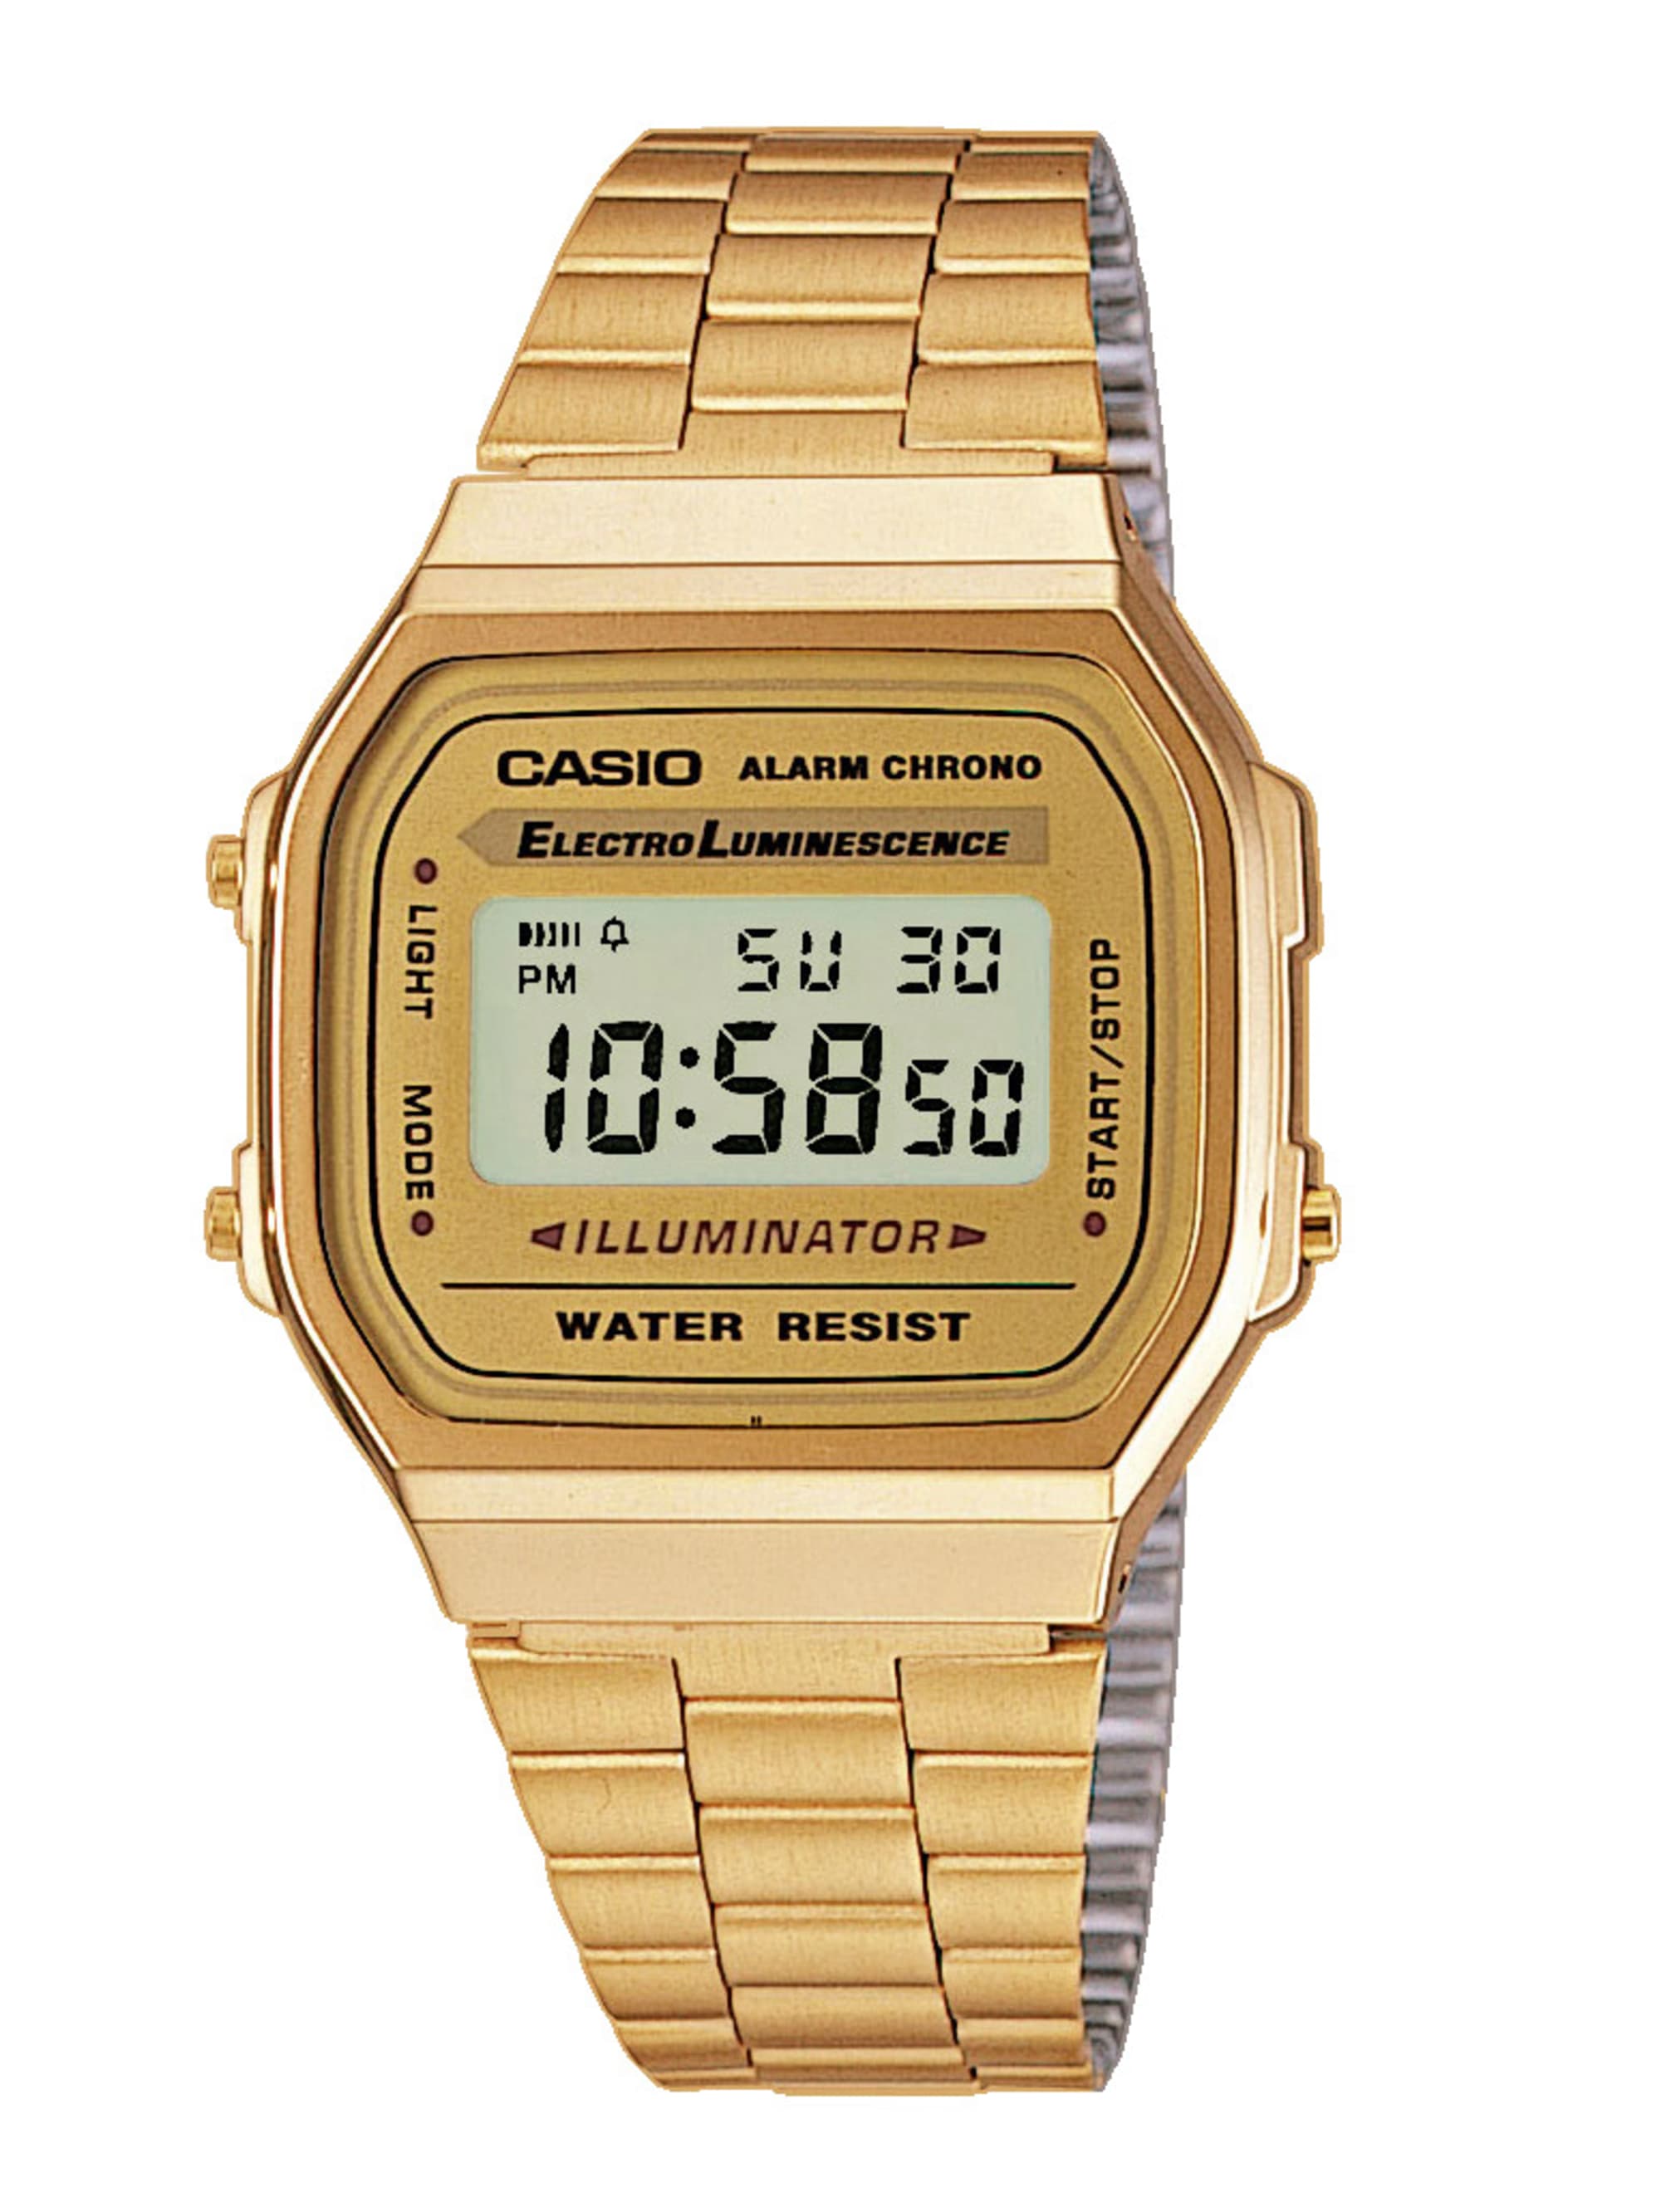 Casio Armbanduhr Collection A168WG-9EF